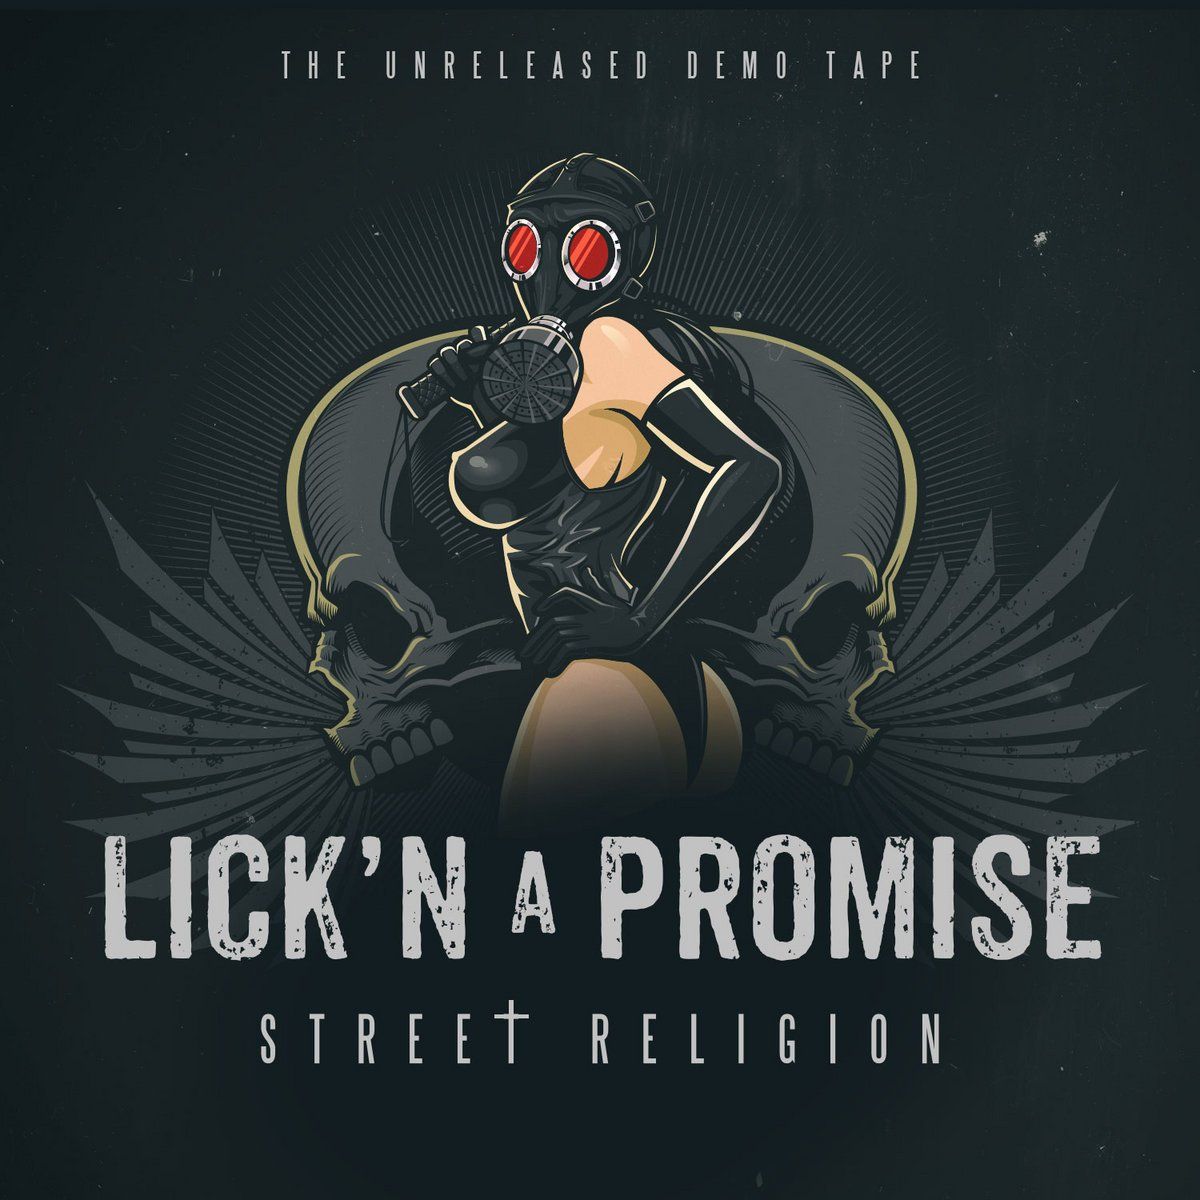 best of Font promise and Lick a